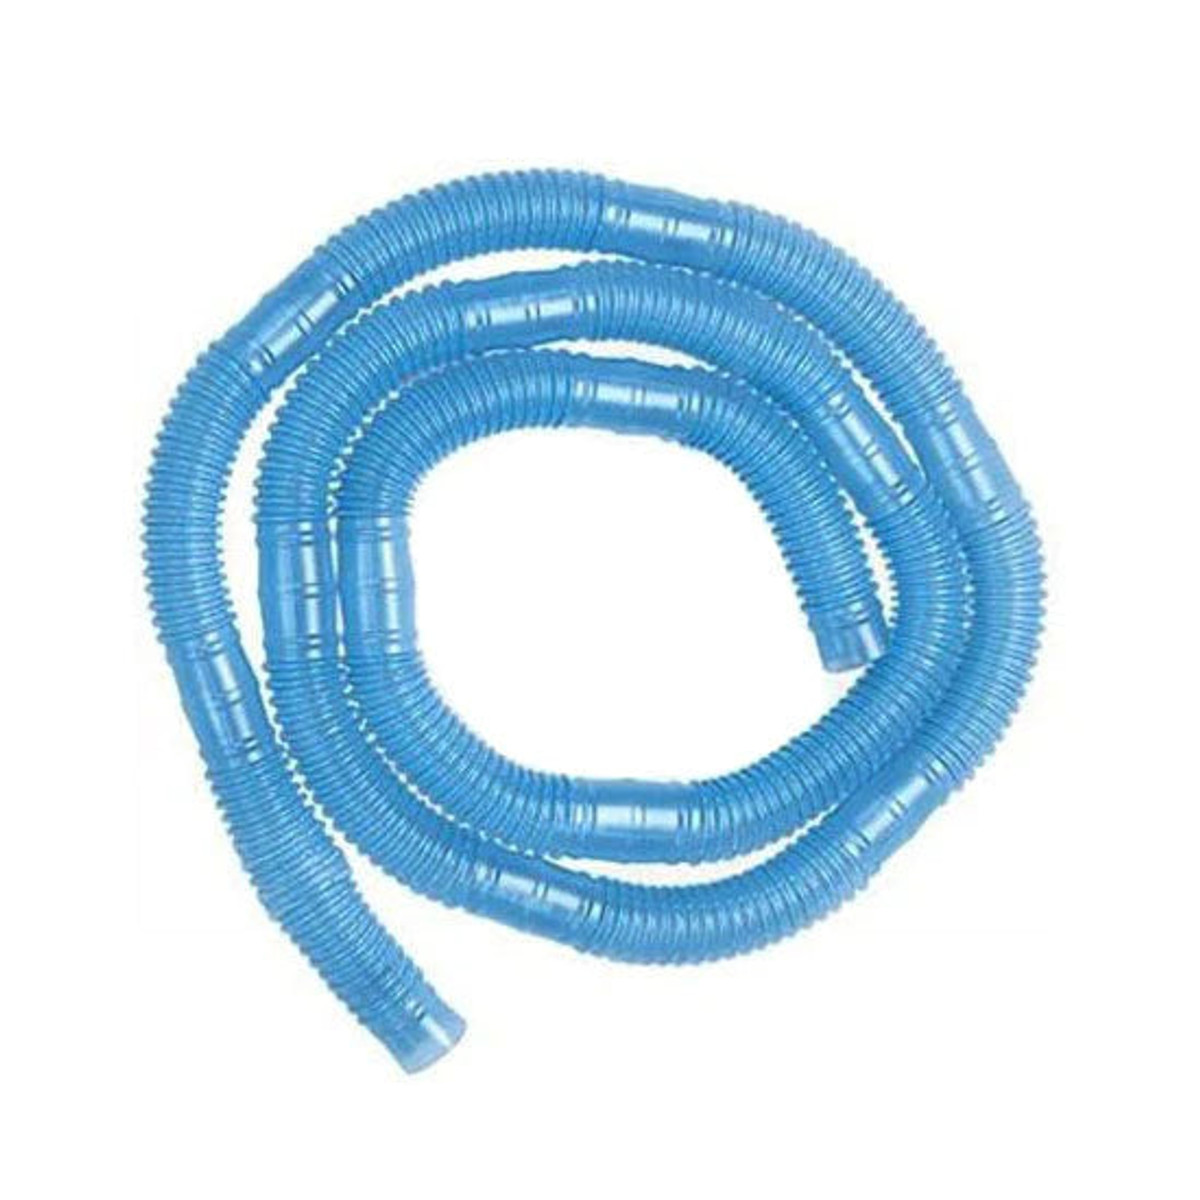 Vyaire AirLife Corrugated Tubing